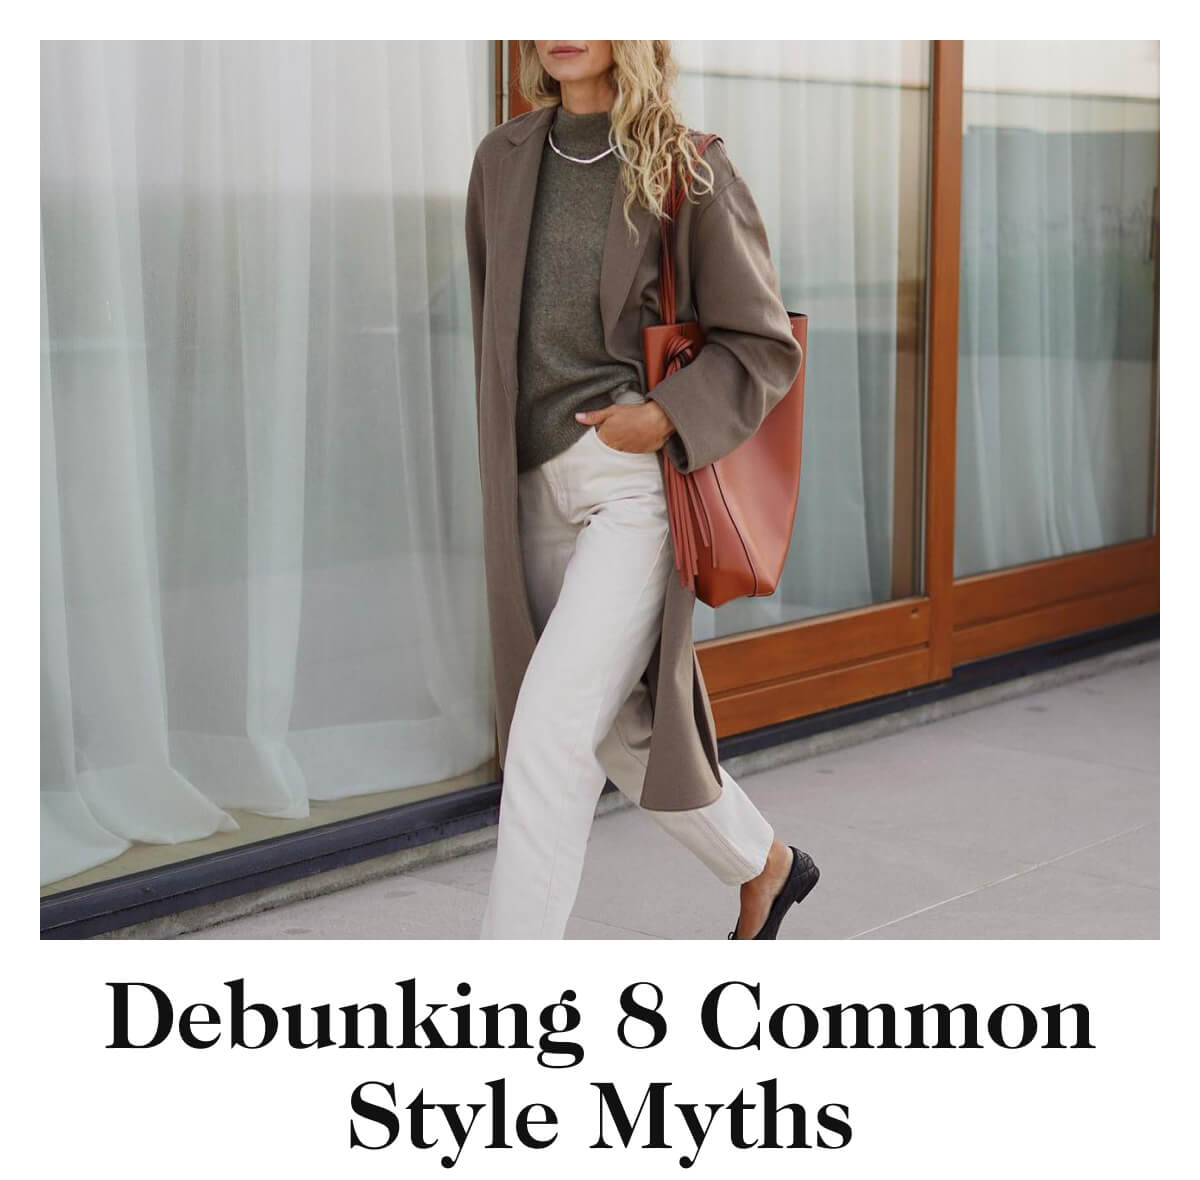 Debunking 8 Common Style Myths